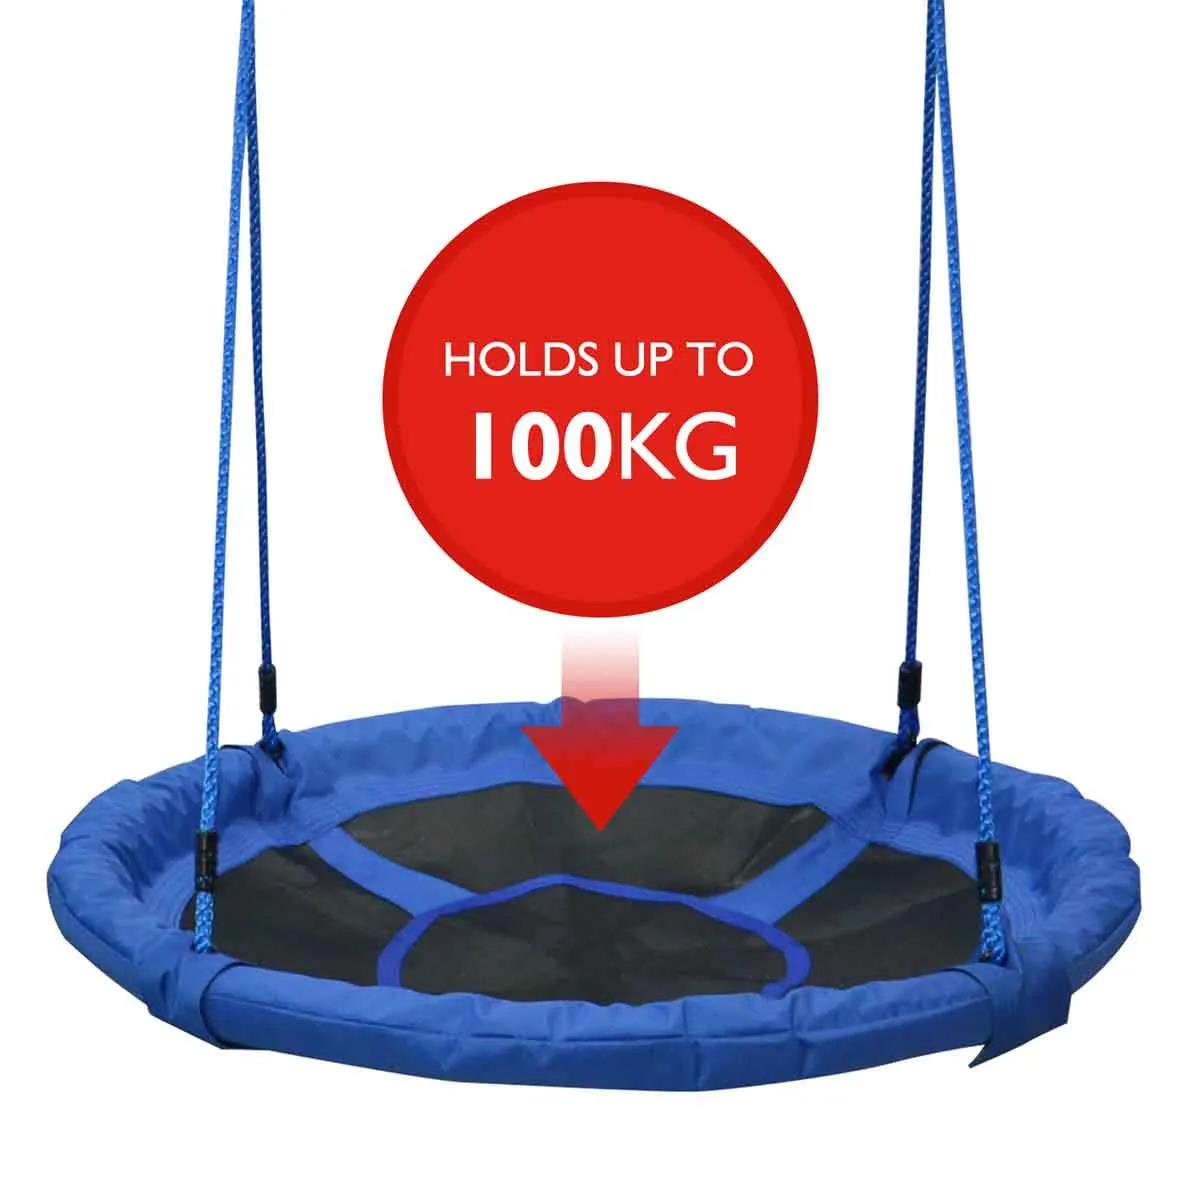 Large Nest Swing for 2 kids by The Magic Toy Shop - The Magic Toy Shop